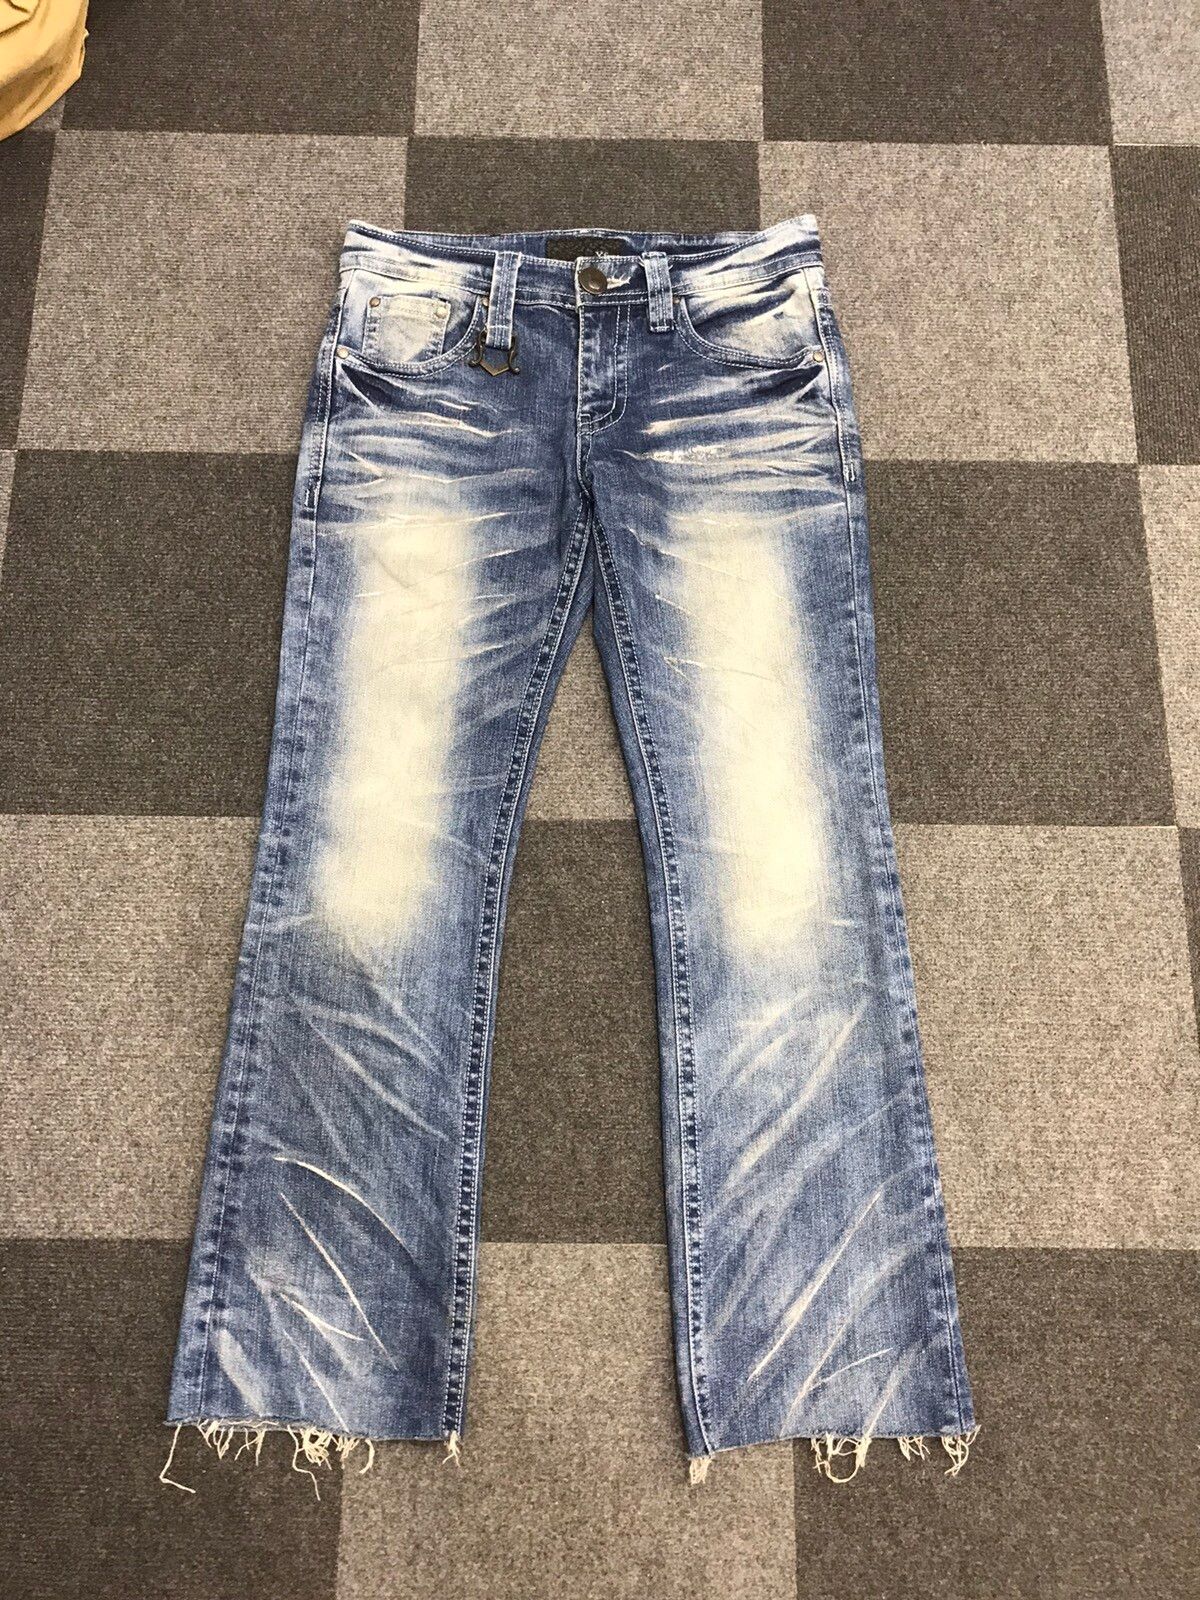 Japanese Brand Xfrm Japan Punk Ankle Cut Flare Jeans | Grailed